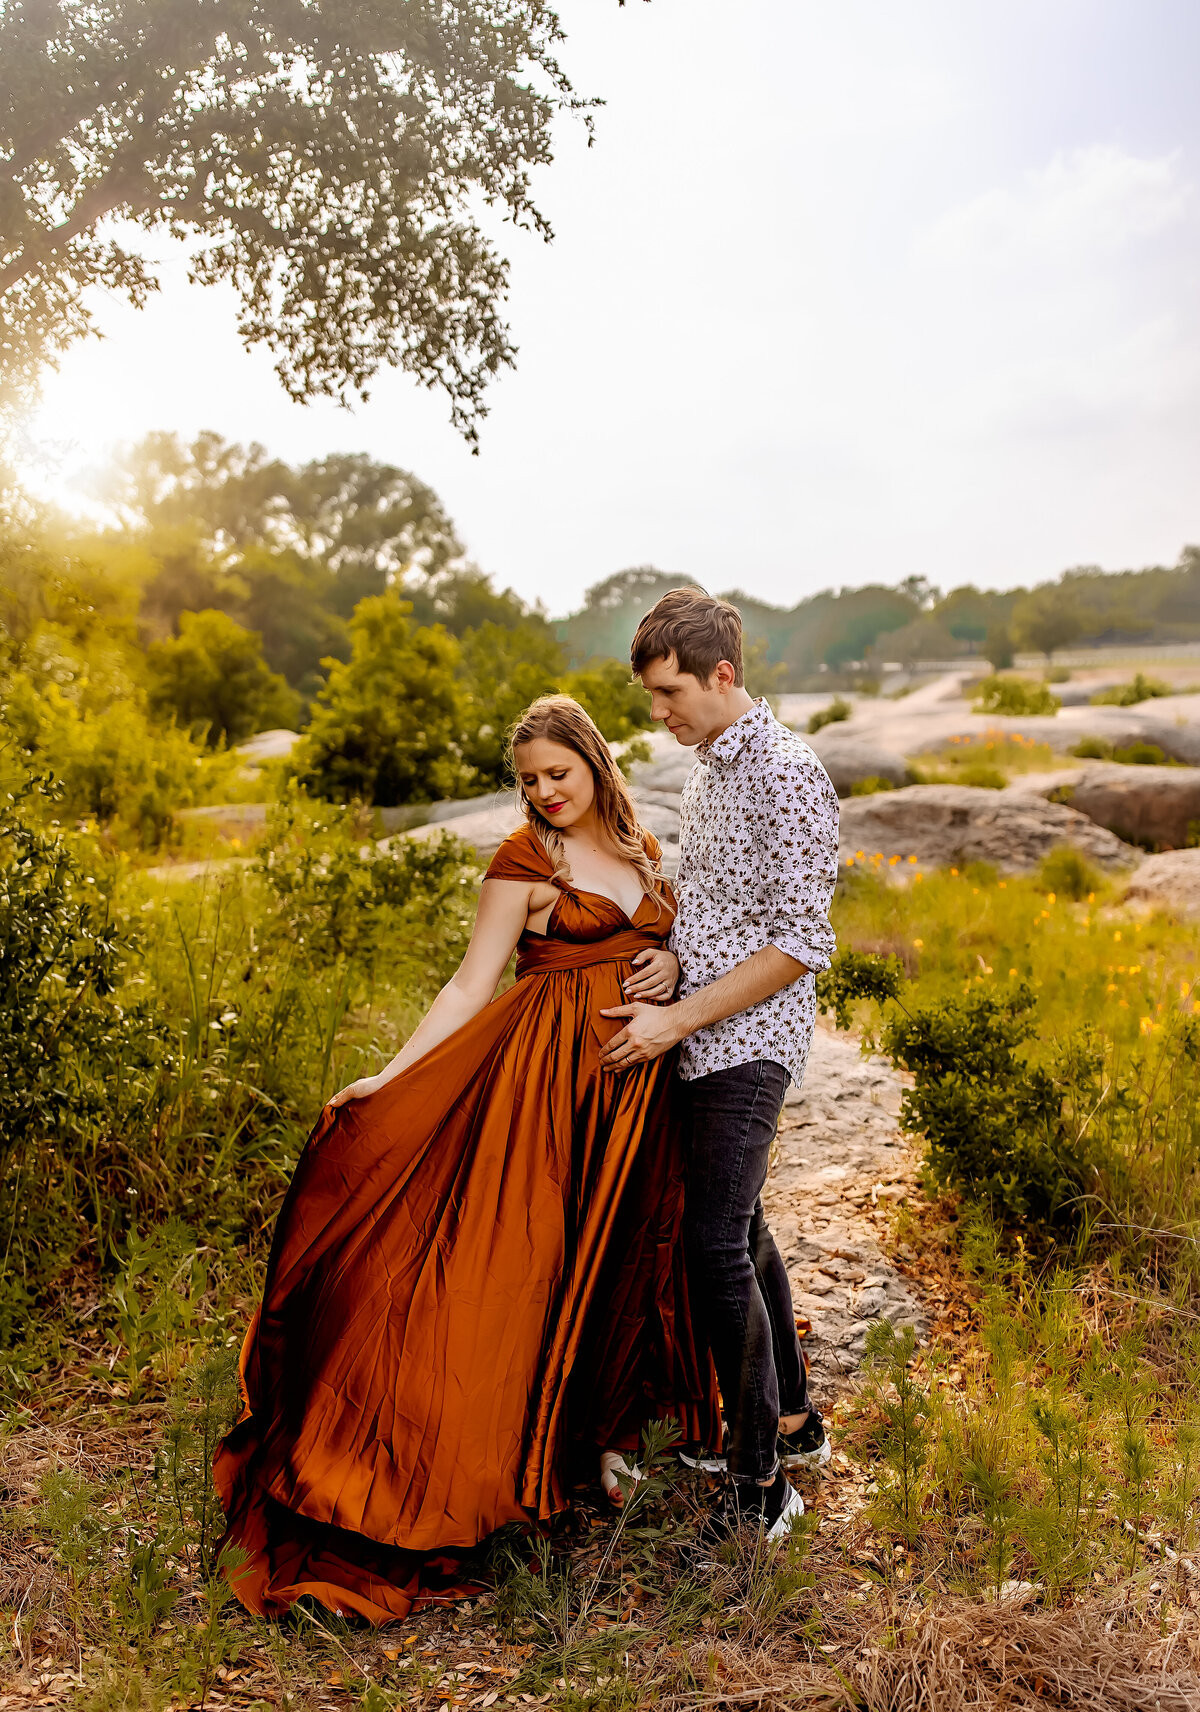 Affordable Maternity session | Burleson, TX Family and Newborn Photographer